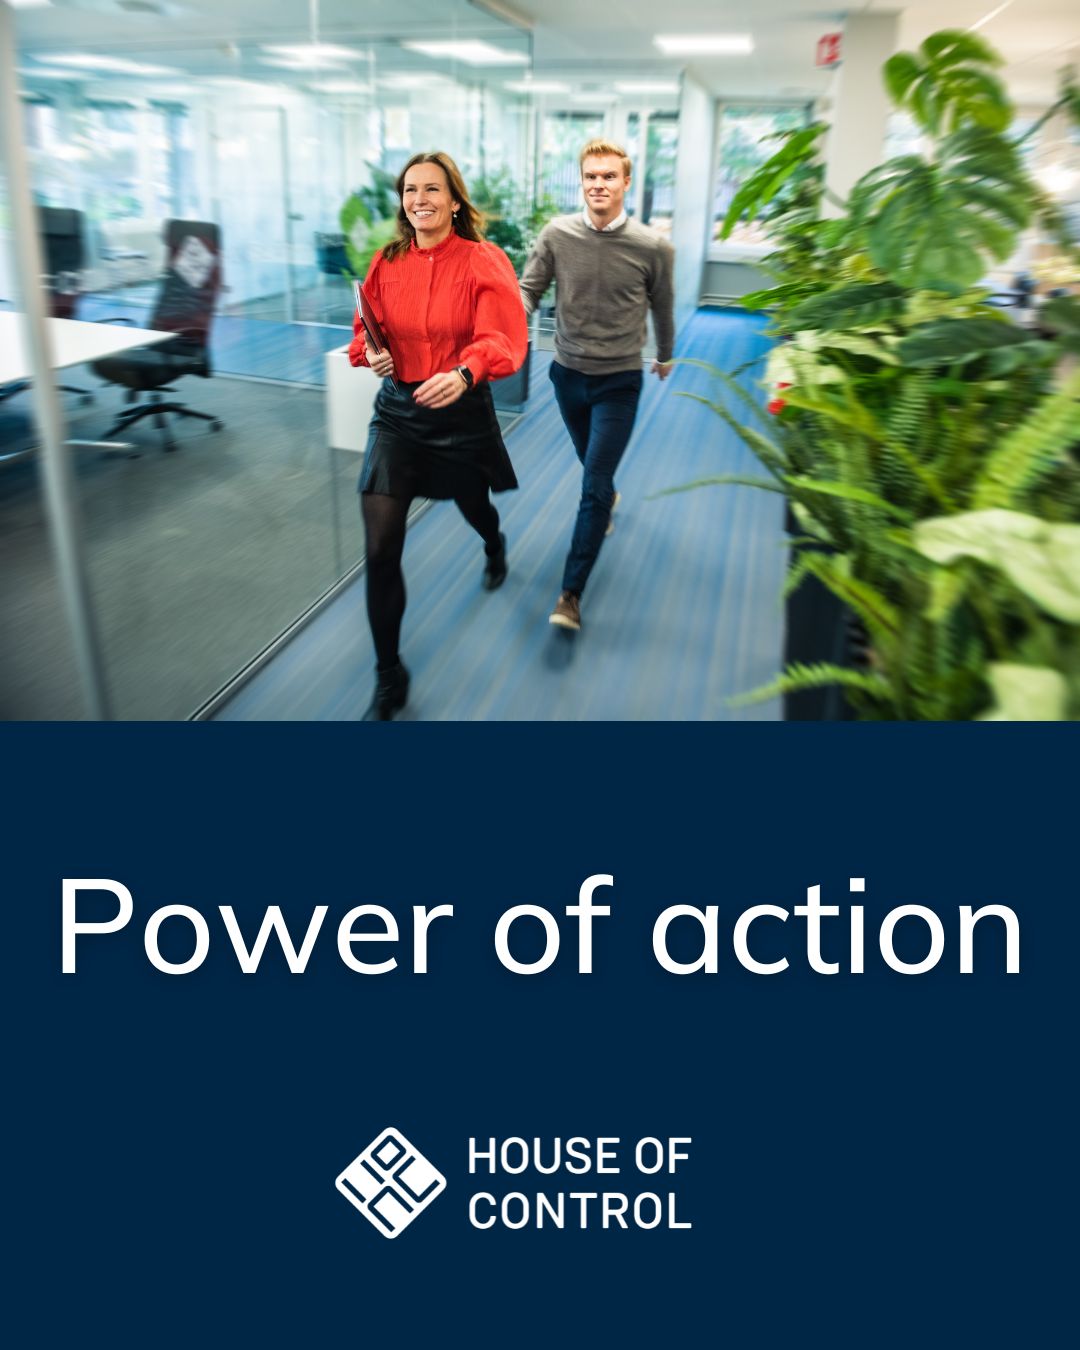 About House of Control - Power of action